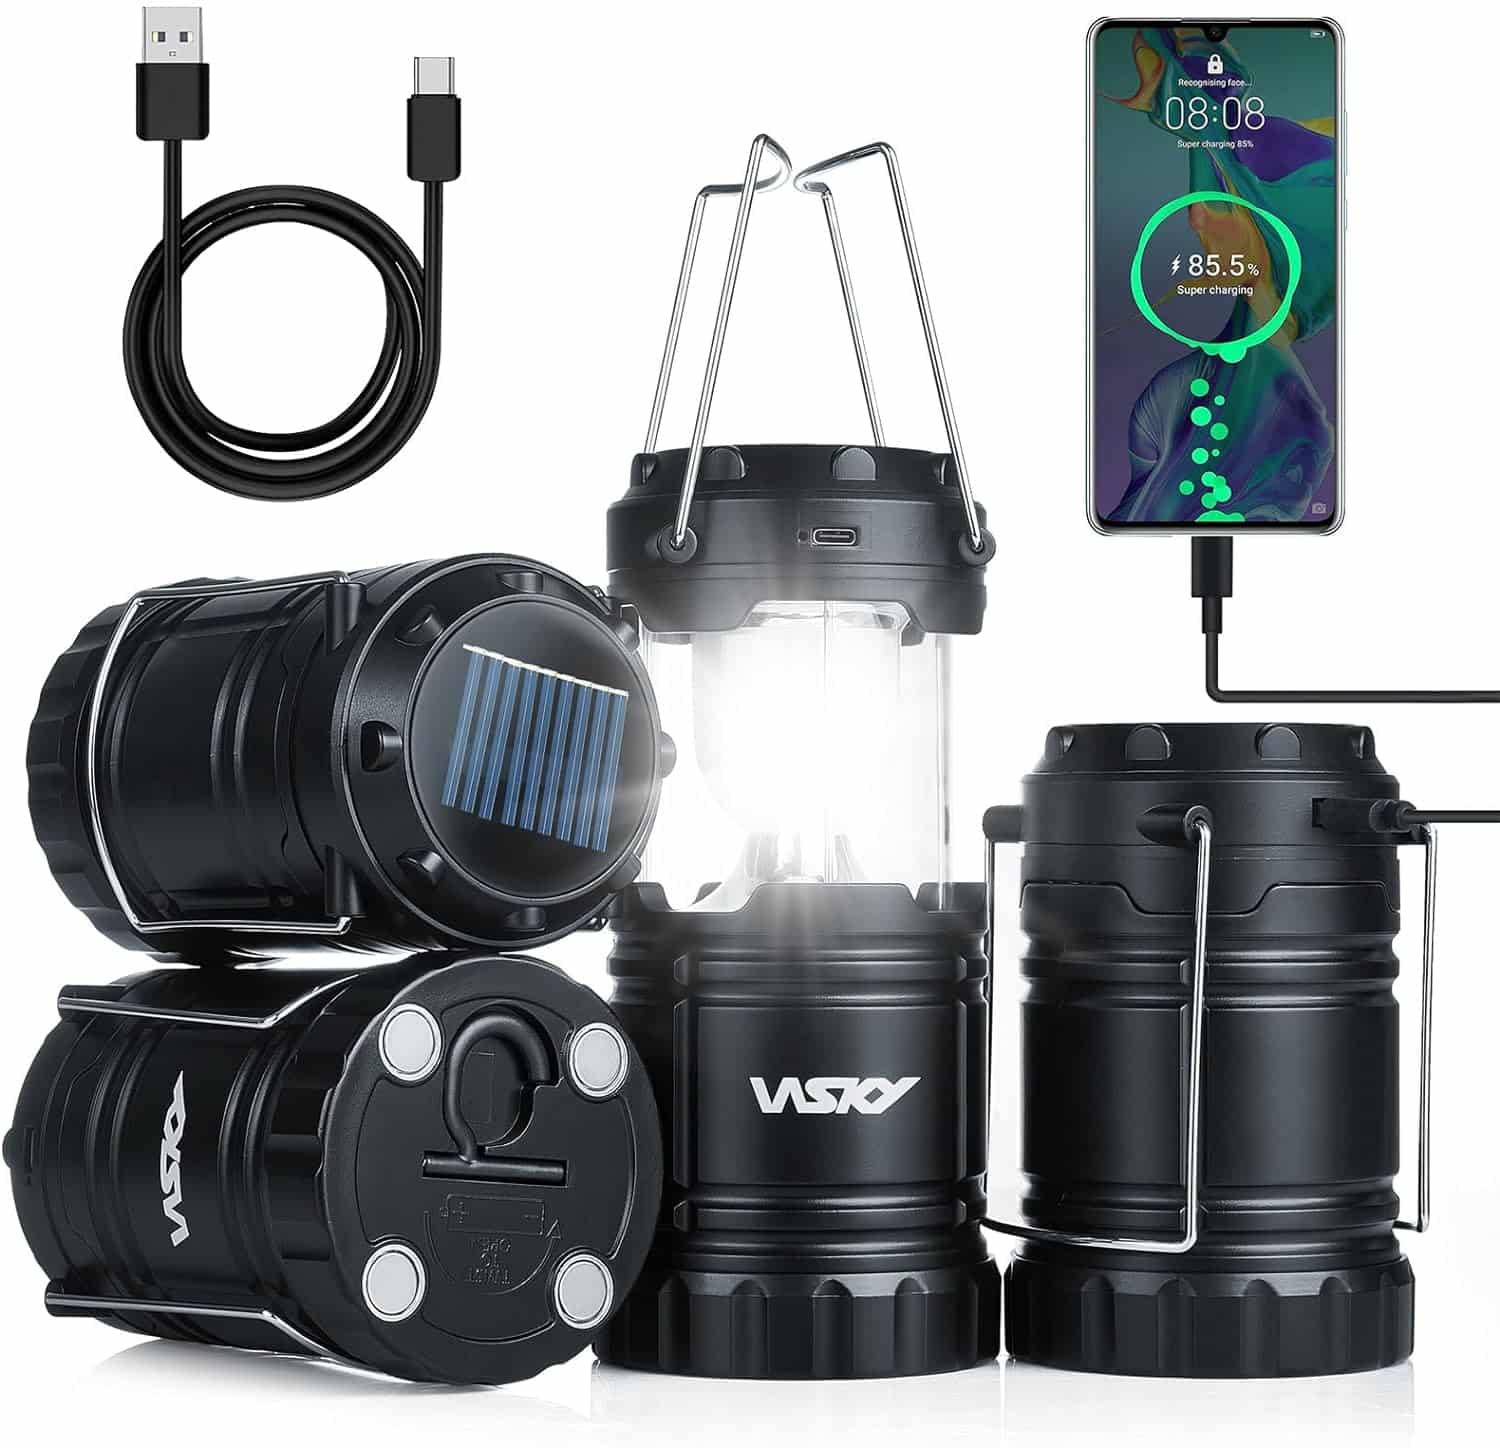 Wsky Solar Camping Lantern 4-Pack - Rechargeable LED Lights, Magnetic Base  Foldable Hanging Hook- Collapsible Lamp Battery Powered Perfect for Power Outages, Hiking, Campsites, Emergencies